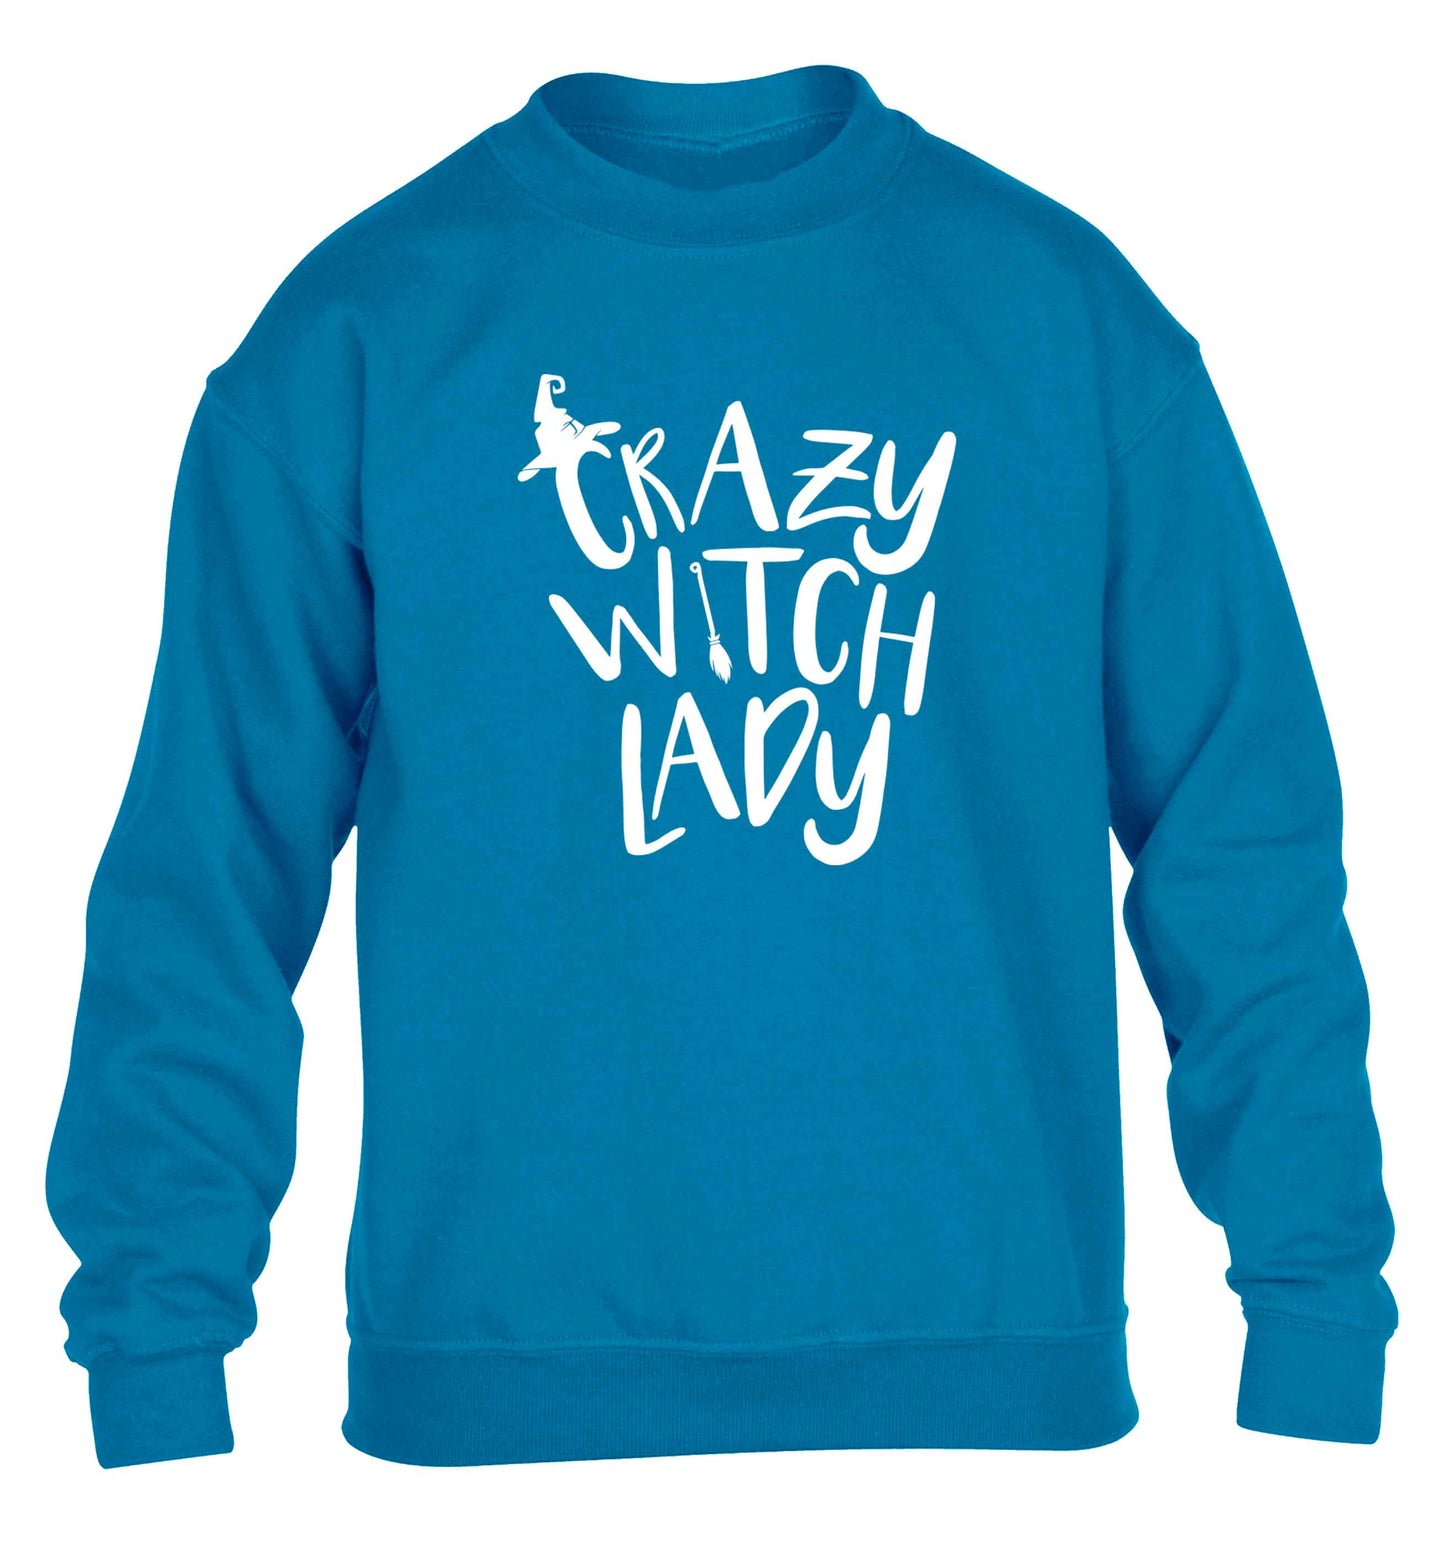 Crazy witch lady children's blue sweater 12-13 Years